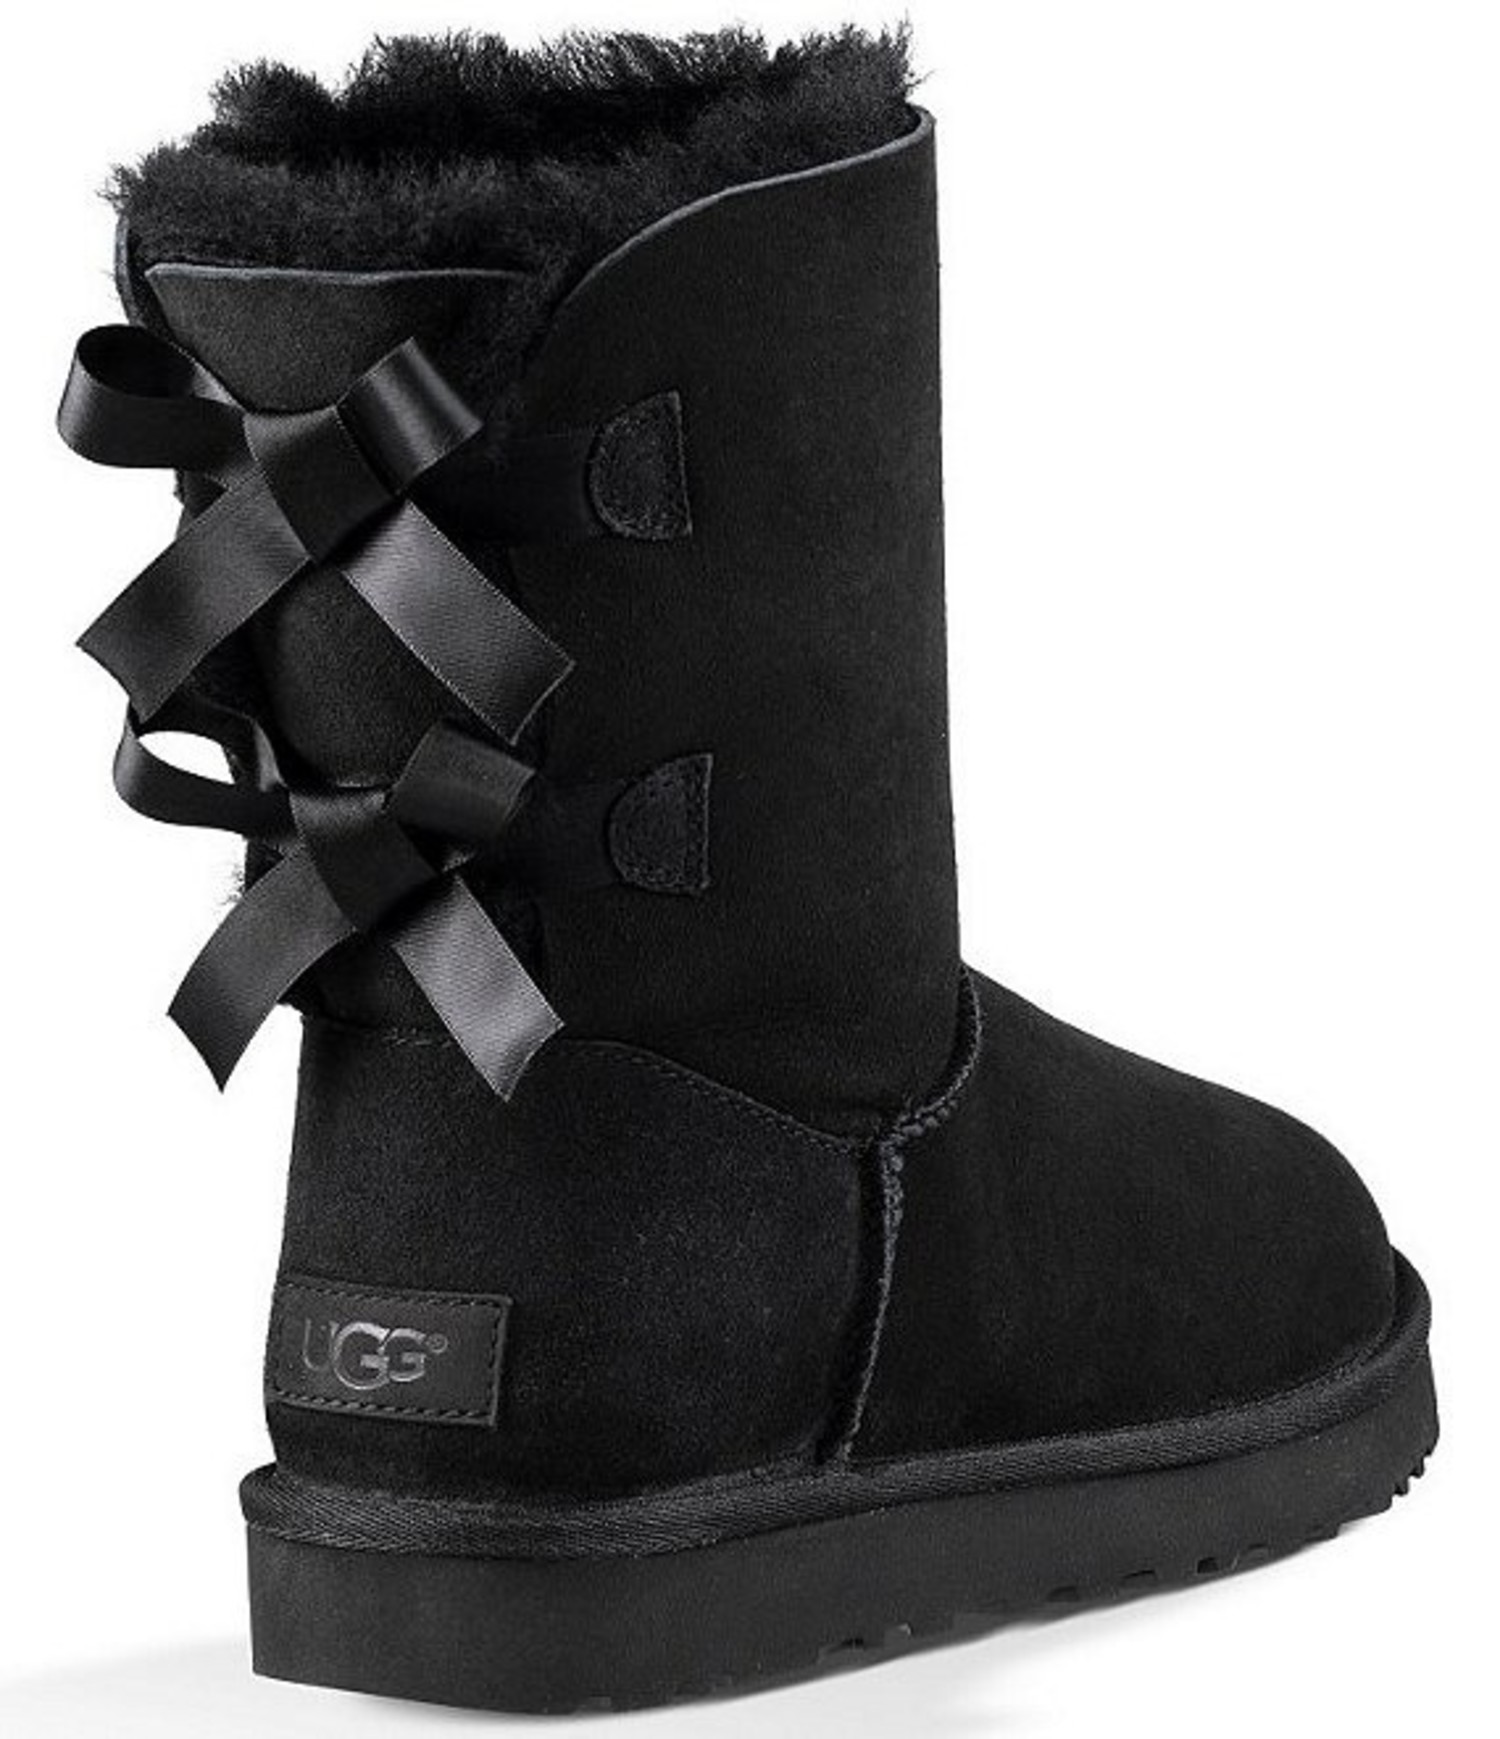 UGG Women's Bailey Bow II Black Boot Continental Shoes